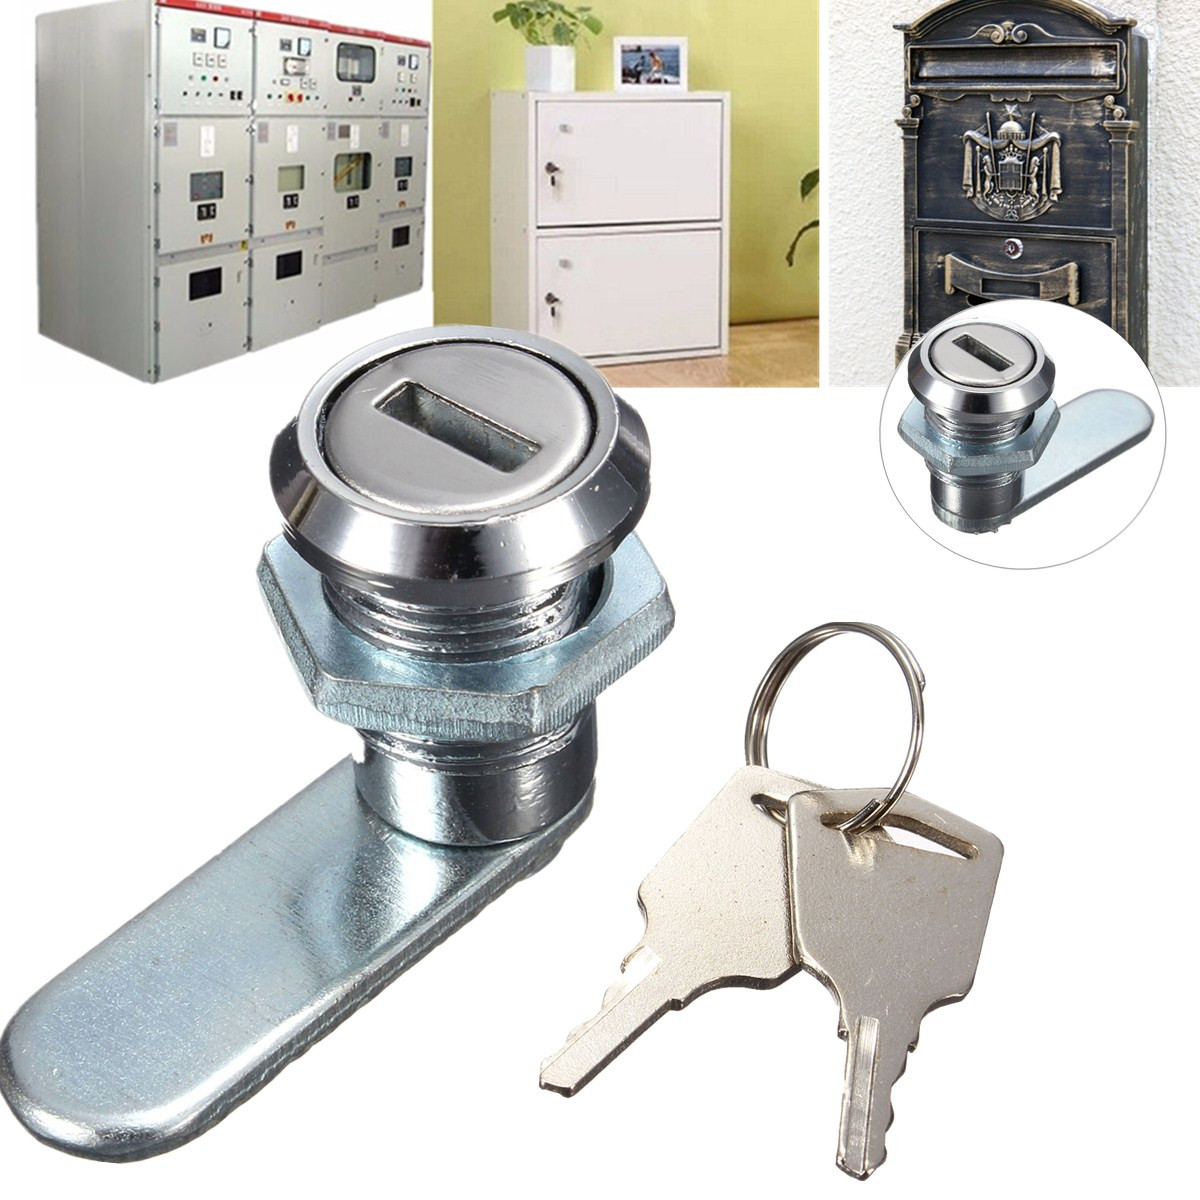 Cam-Lock--Desk-Drawer-Lock-with-2-Keys-for-Arcade-Cupboard-Mail-Box-File-Cabinet-1012973